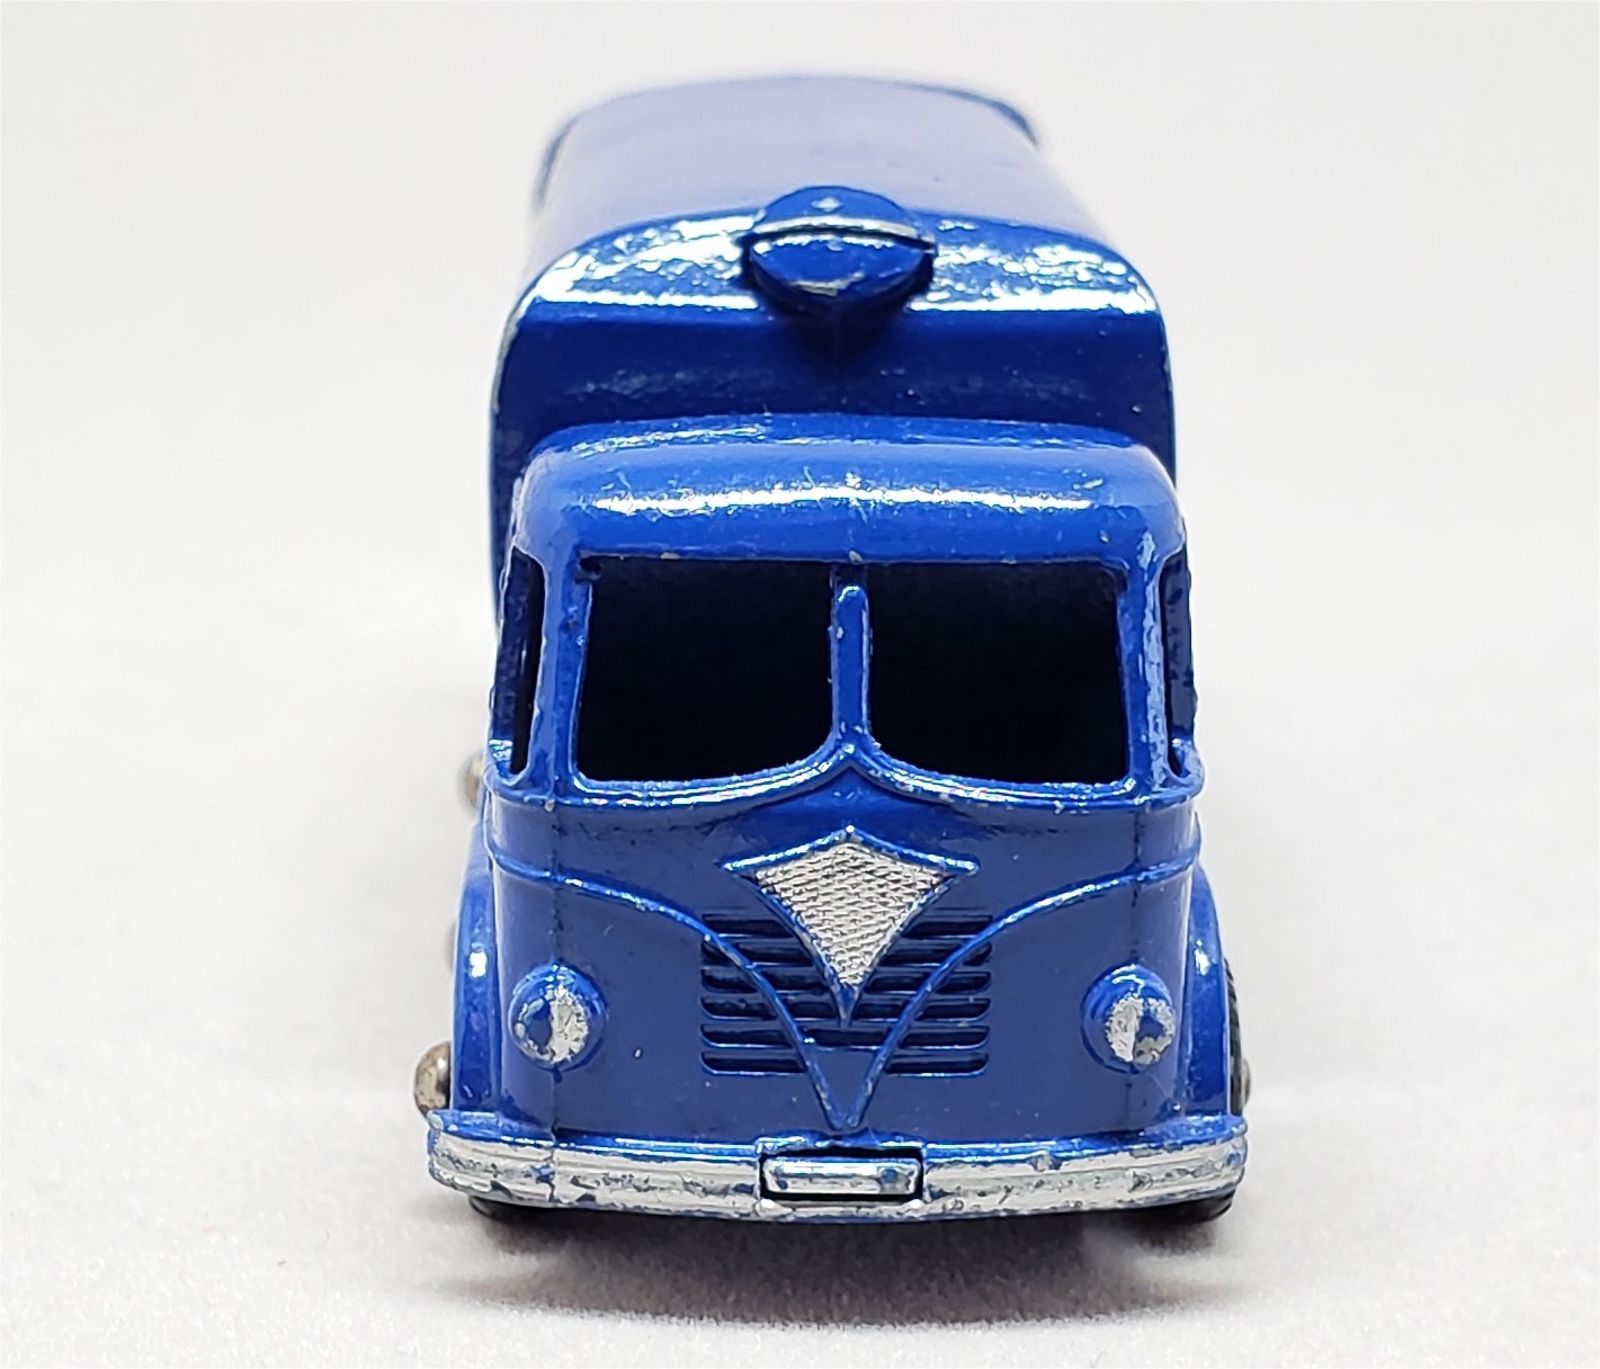 Illustration for article titled [REVIEW] Lesney Matchbox Foden Sugar Container - another one